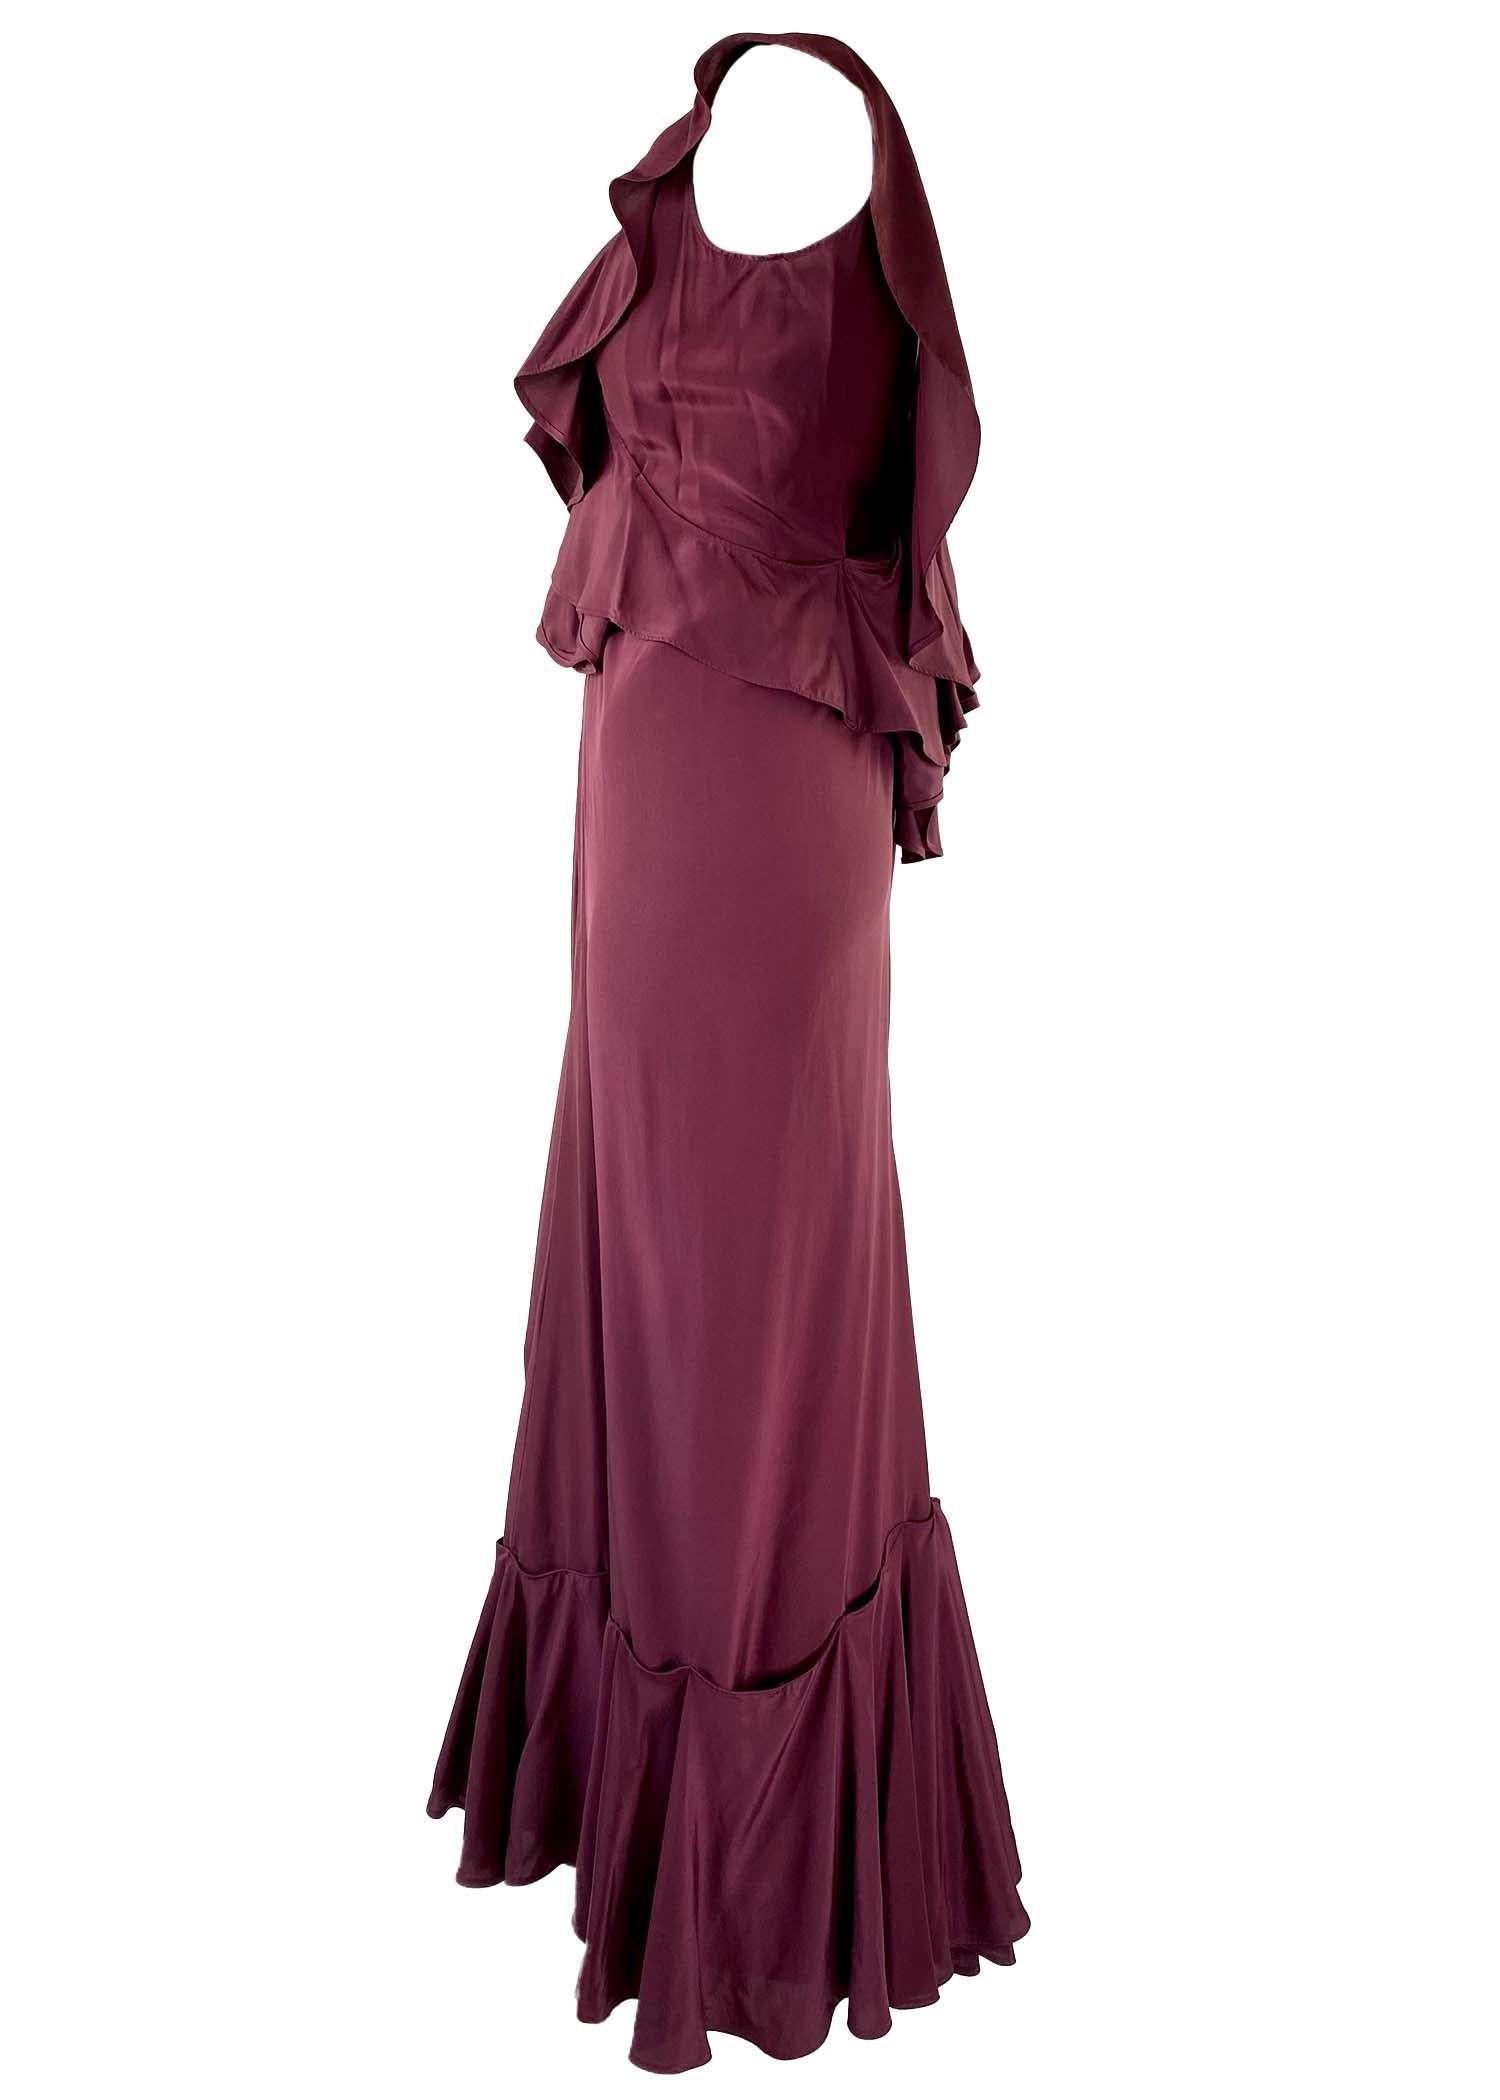 Women's F/W 2003 Yves Saint Laurent by Tom Ford Maroon Silk Ruffle Rive Gauche Gown For Sale